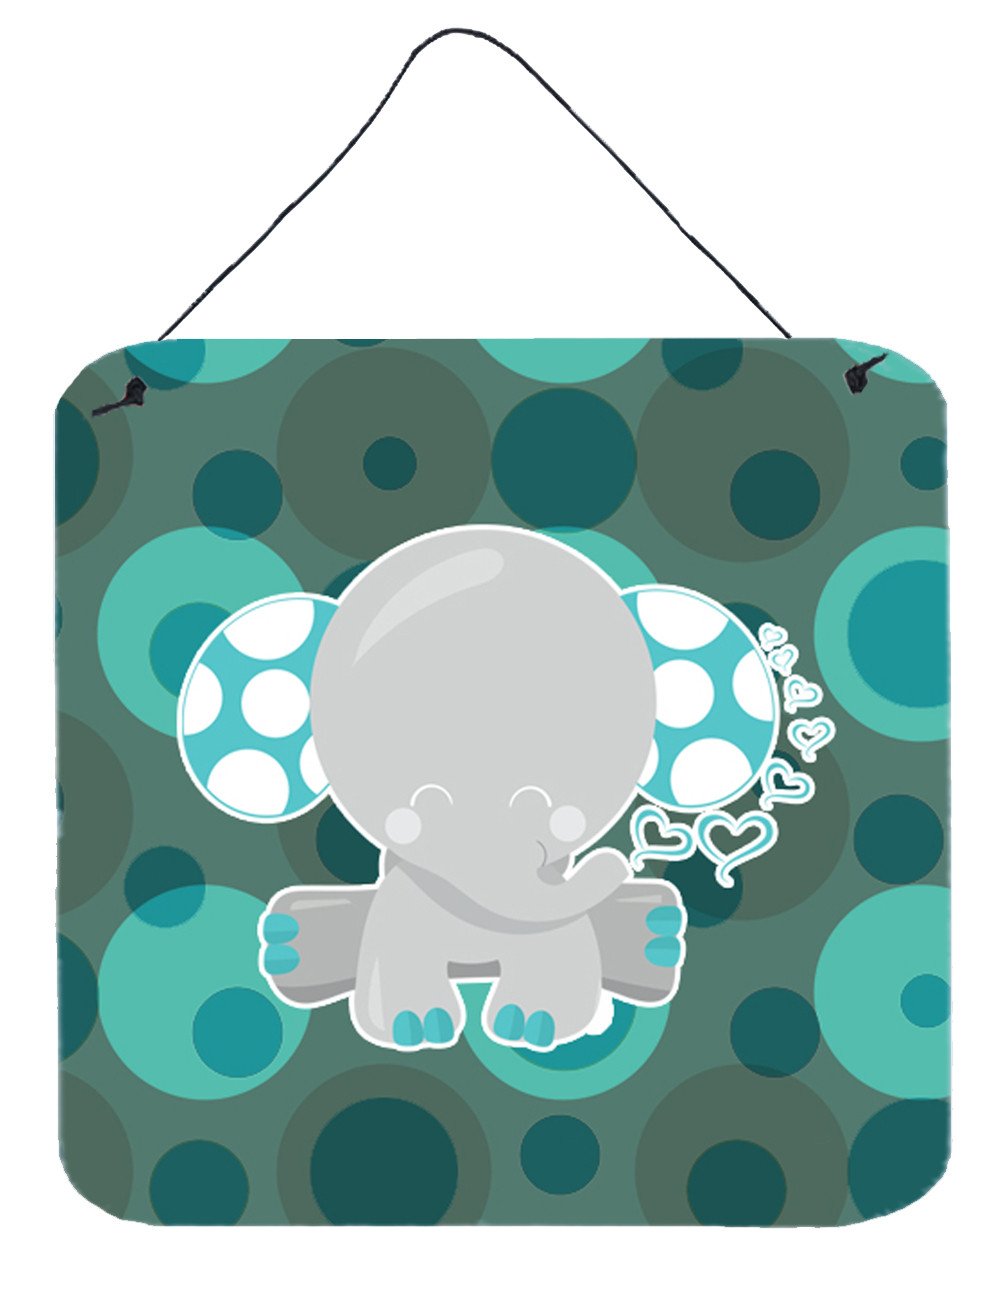 Polkadot Naptime Elephant Wall or Door Hanging Prints BB6838DS66 by Caroline's Treasures